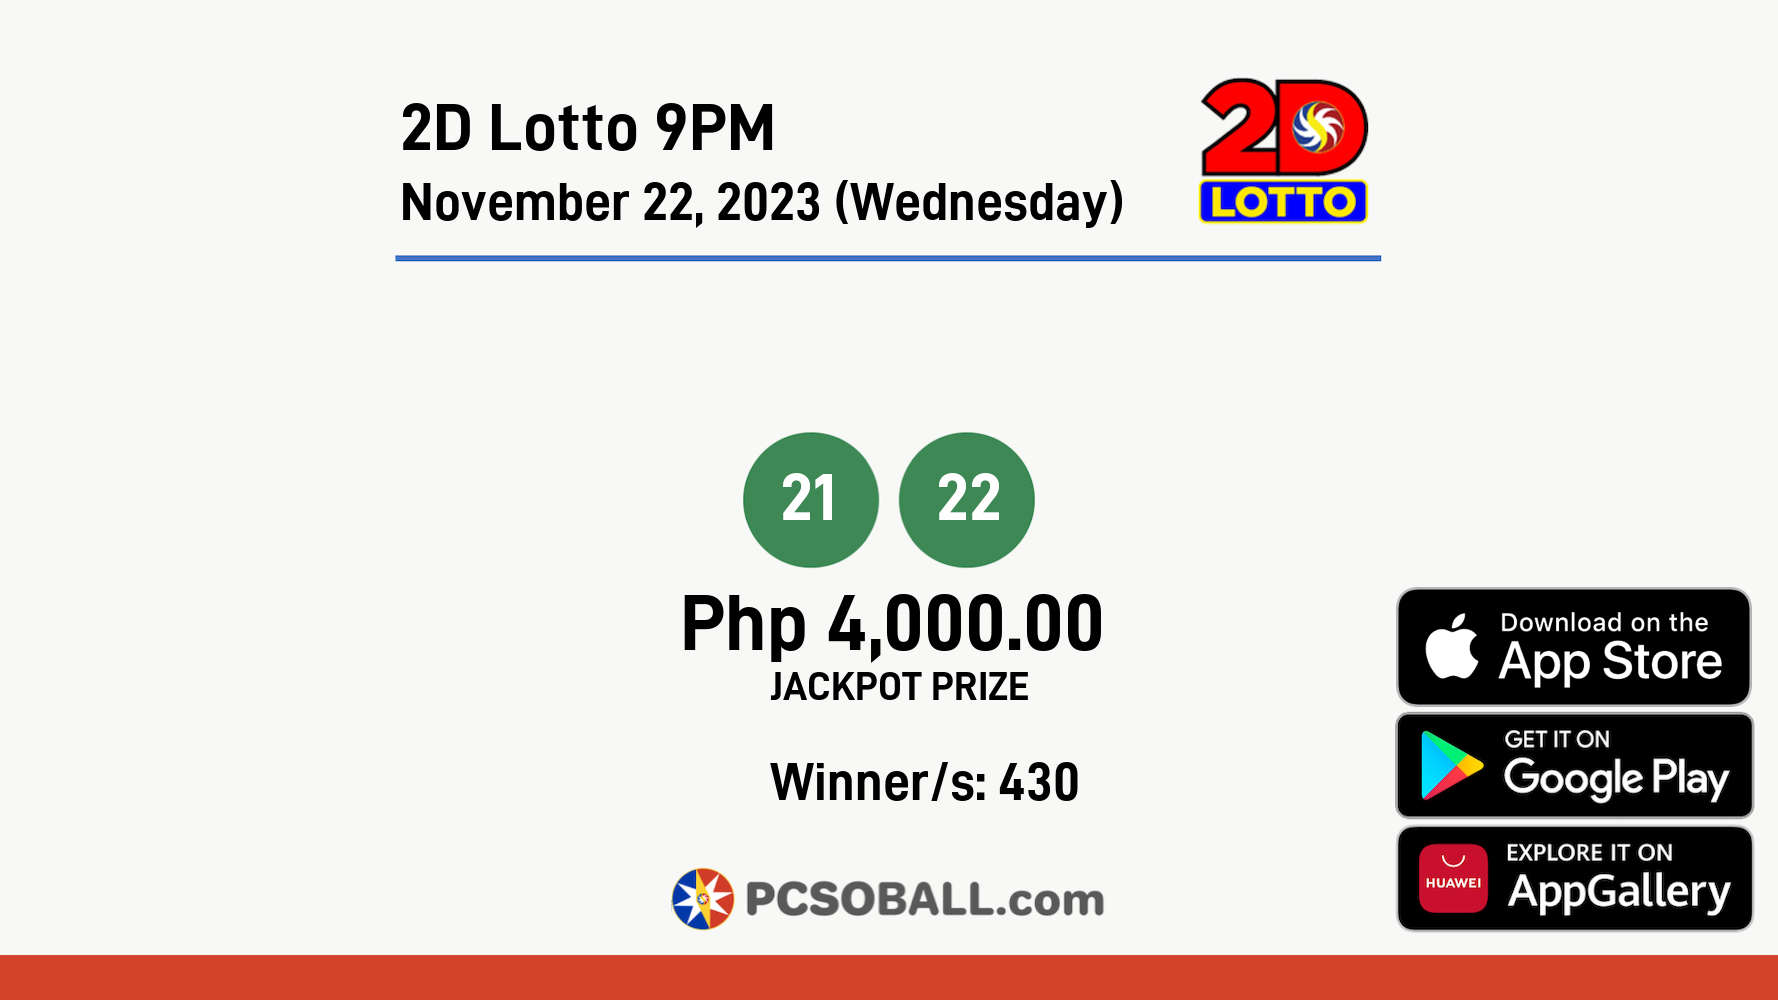 2D Lotto 9PM November 22, 2023 (Wednesday) Result